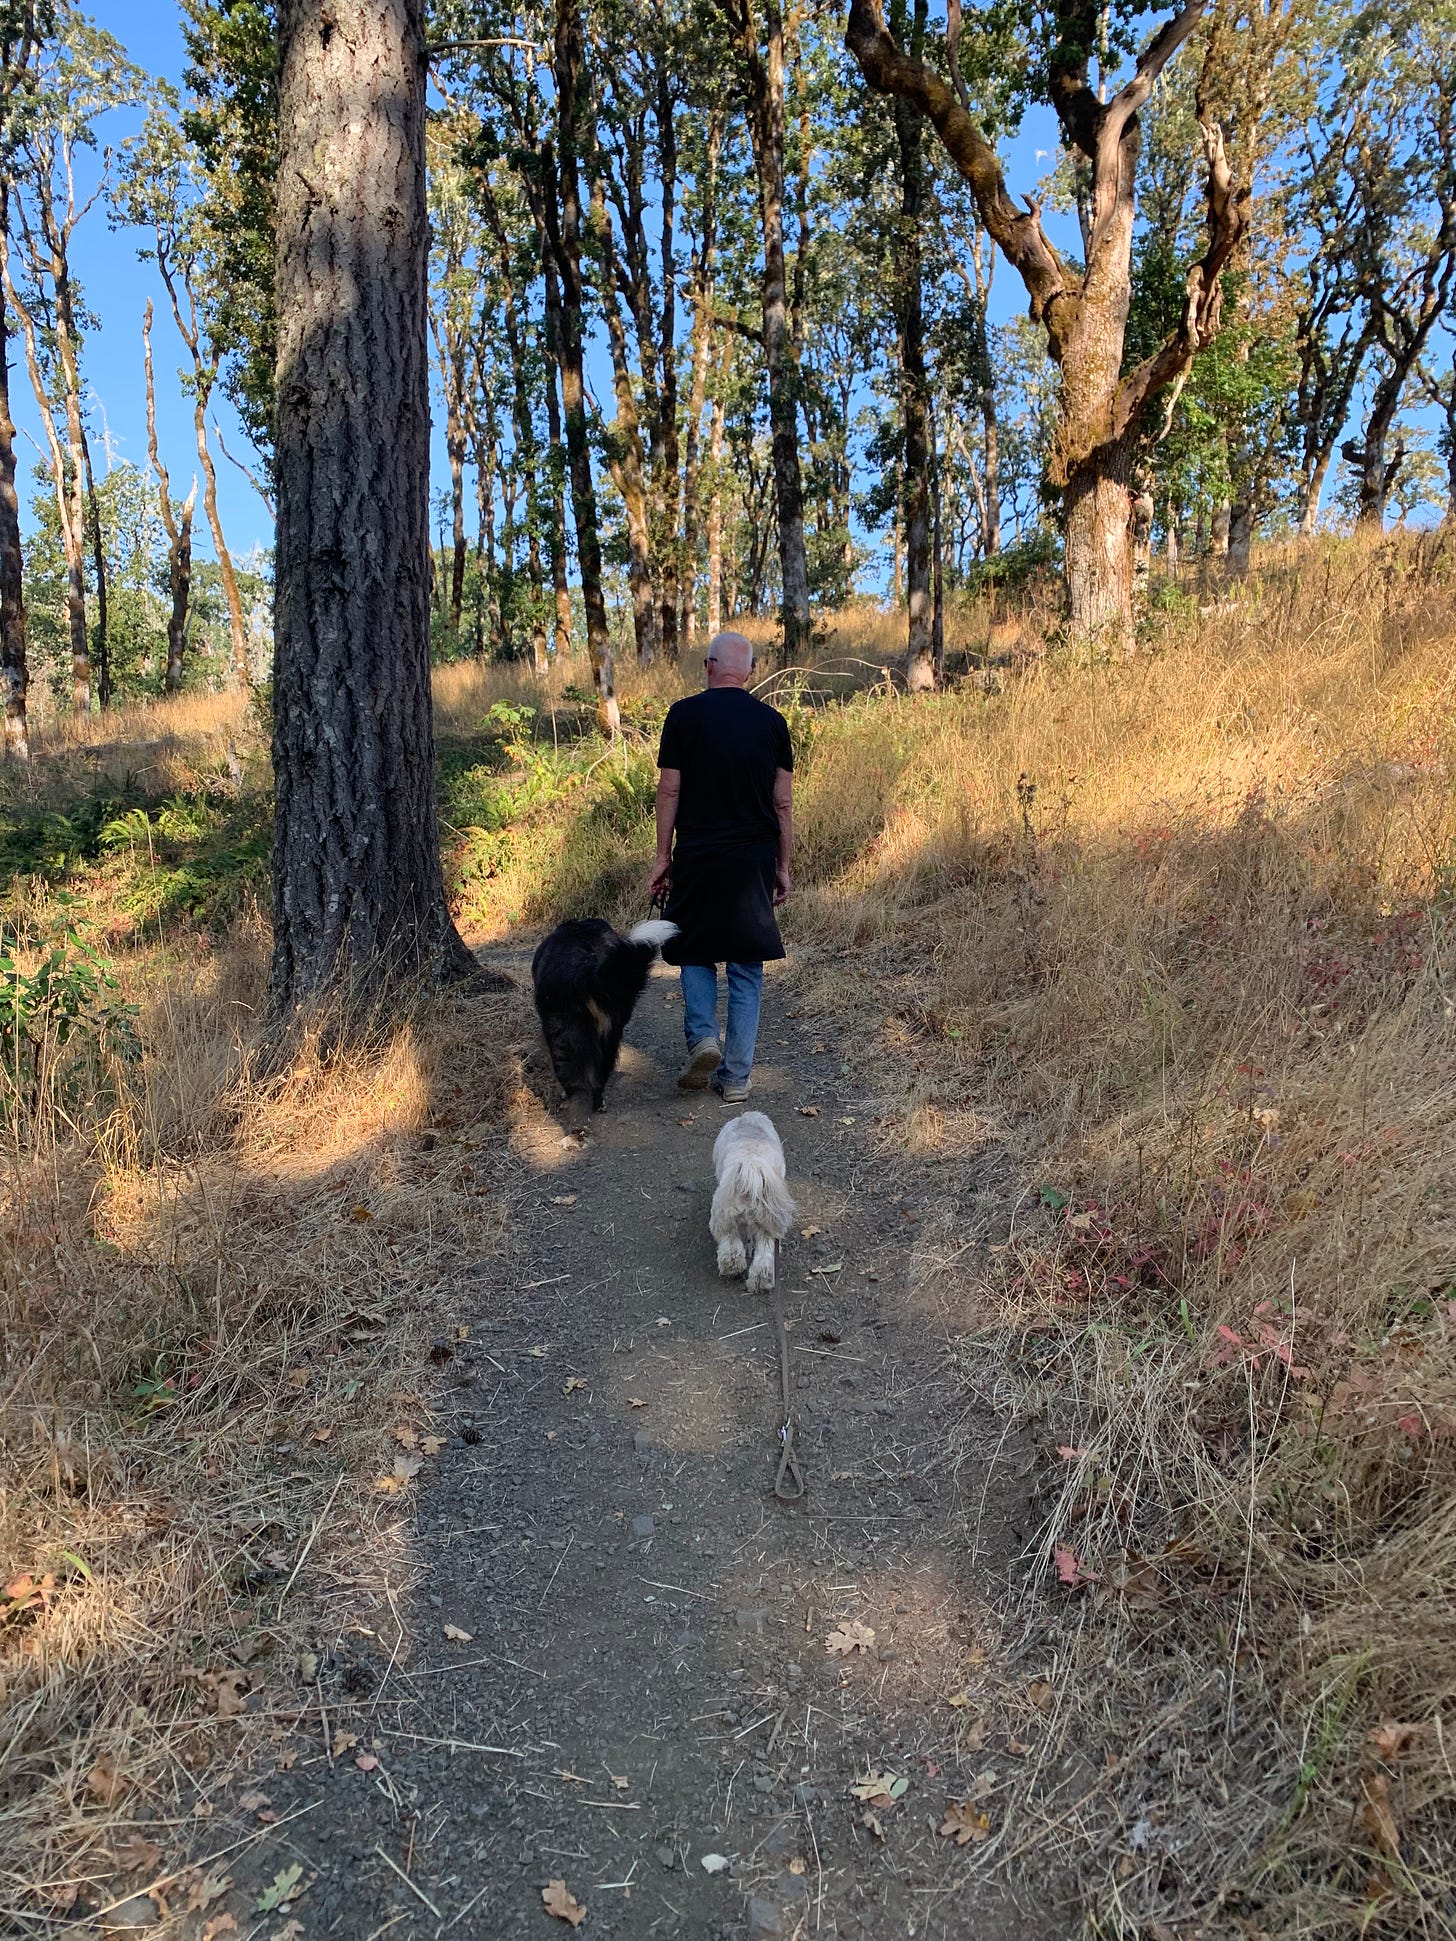 Jim walks down a trail in the wilds of Oregon, with a Bernese Mountain dog by his side and Elsa trundling along behind them.